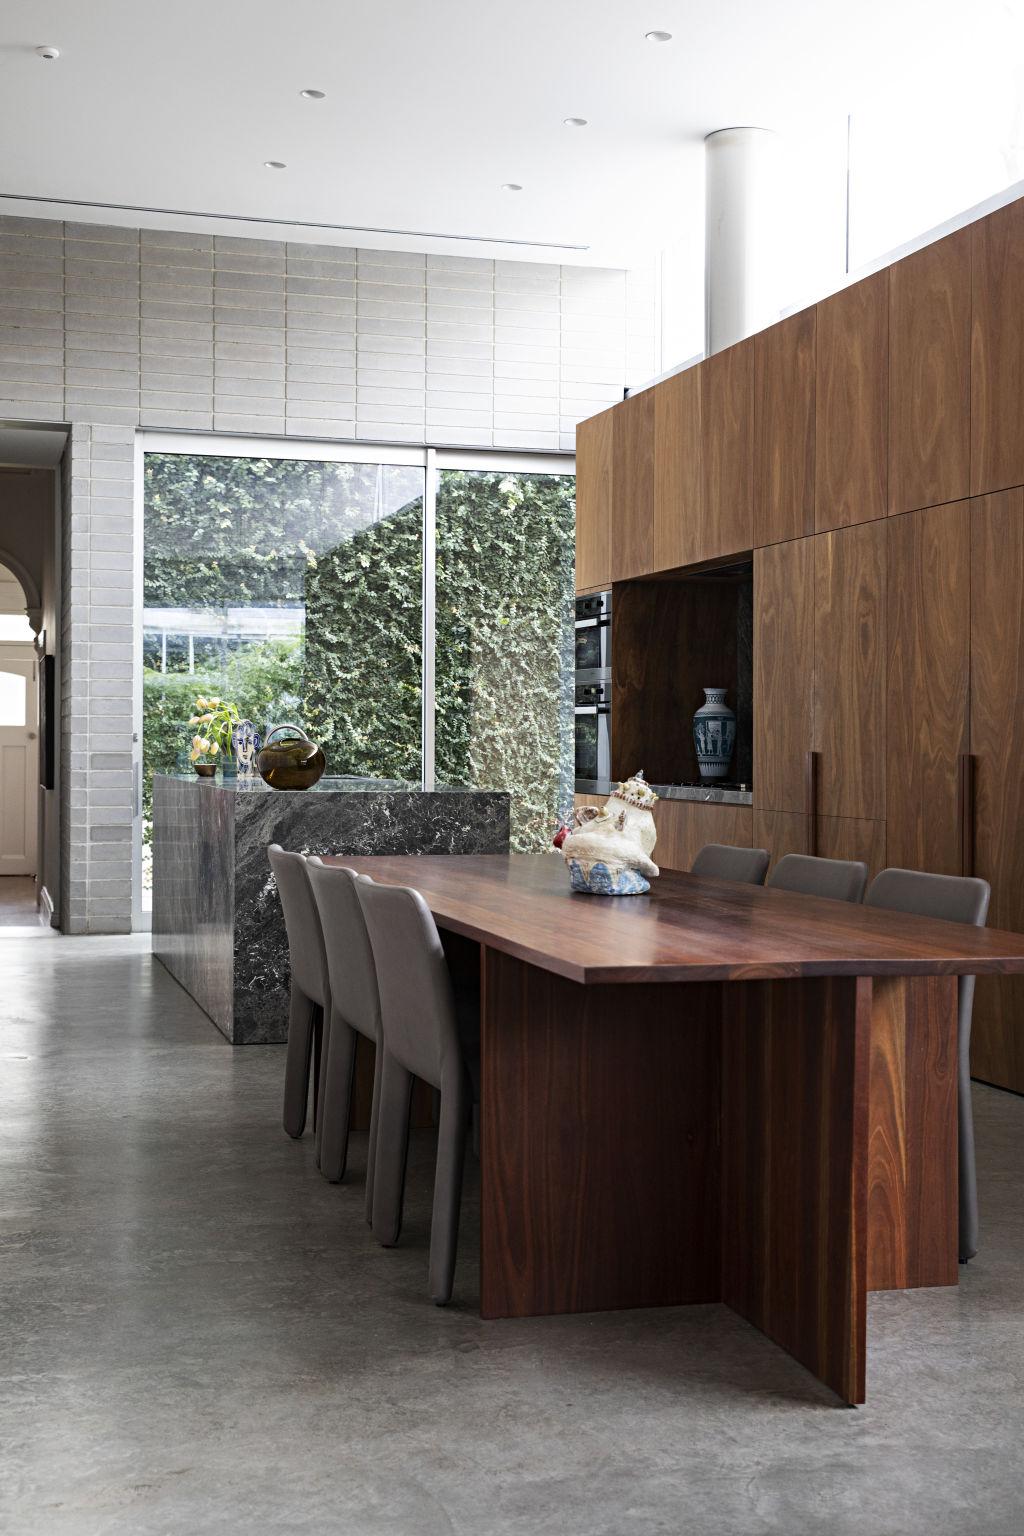 The natural textures coming together in the kitchen and dining space.  Photo: Natalie Jeffcott